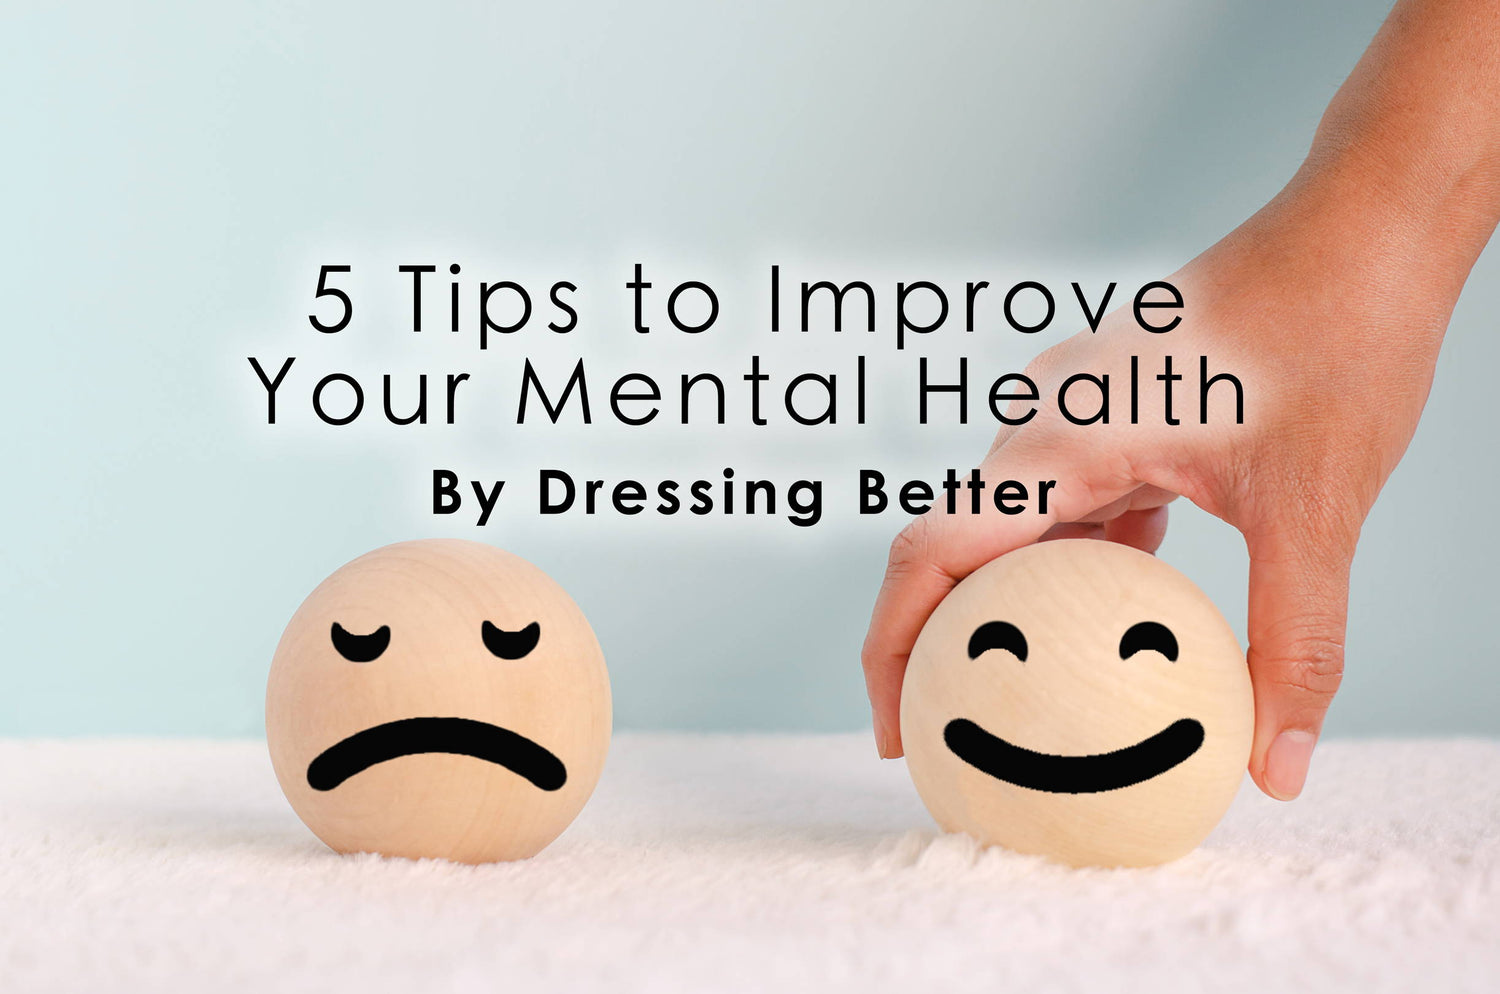 5 Tips to Improve Your Mental Health by Dressing Better